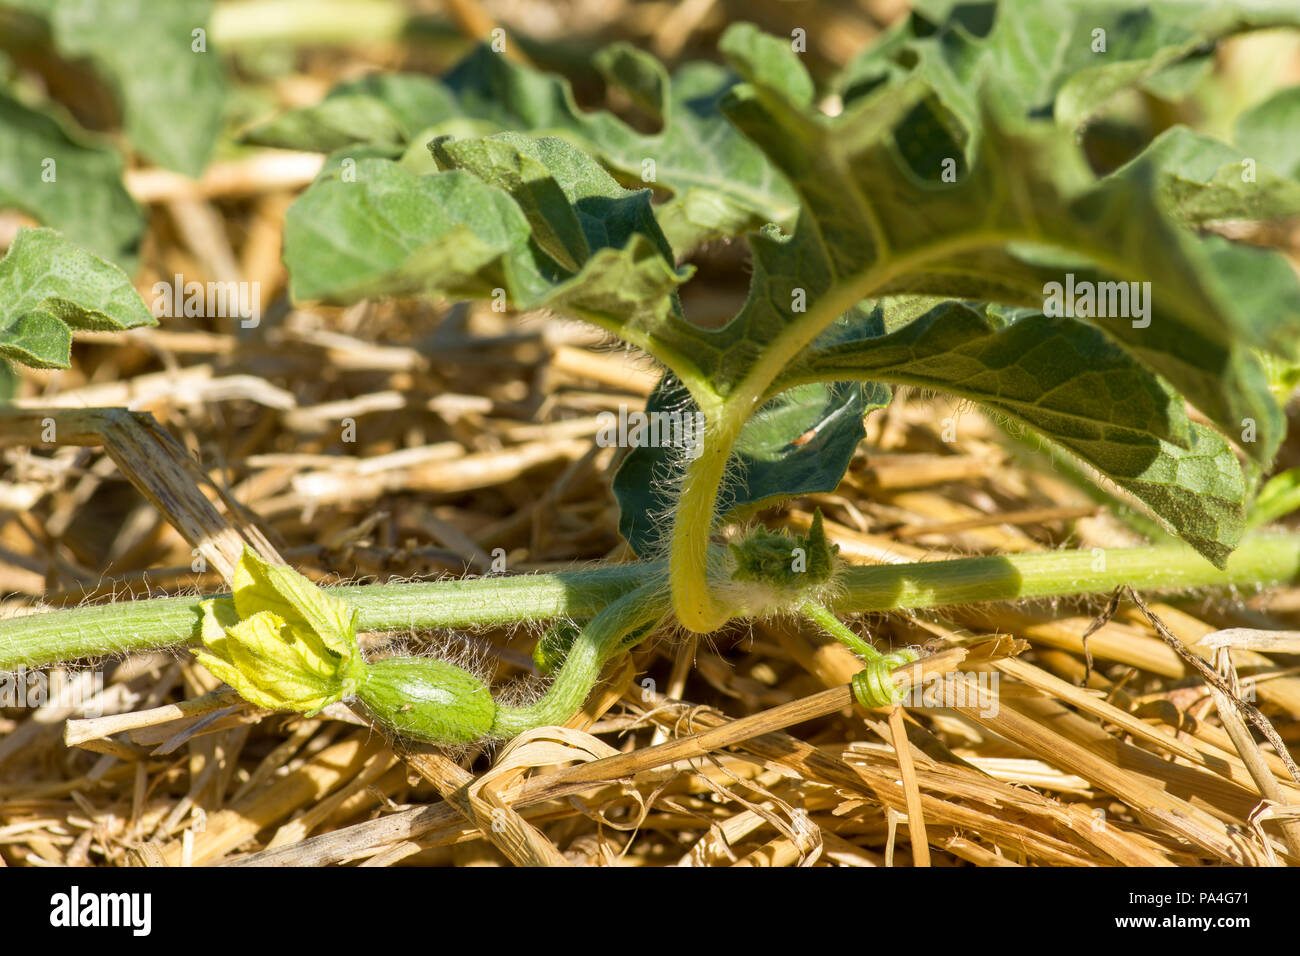 Faerie Hybrid watermelon growing on straw mulch with young fruit. Stock Photo